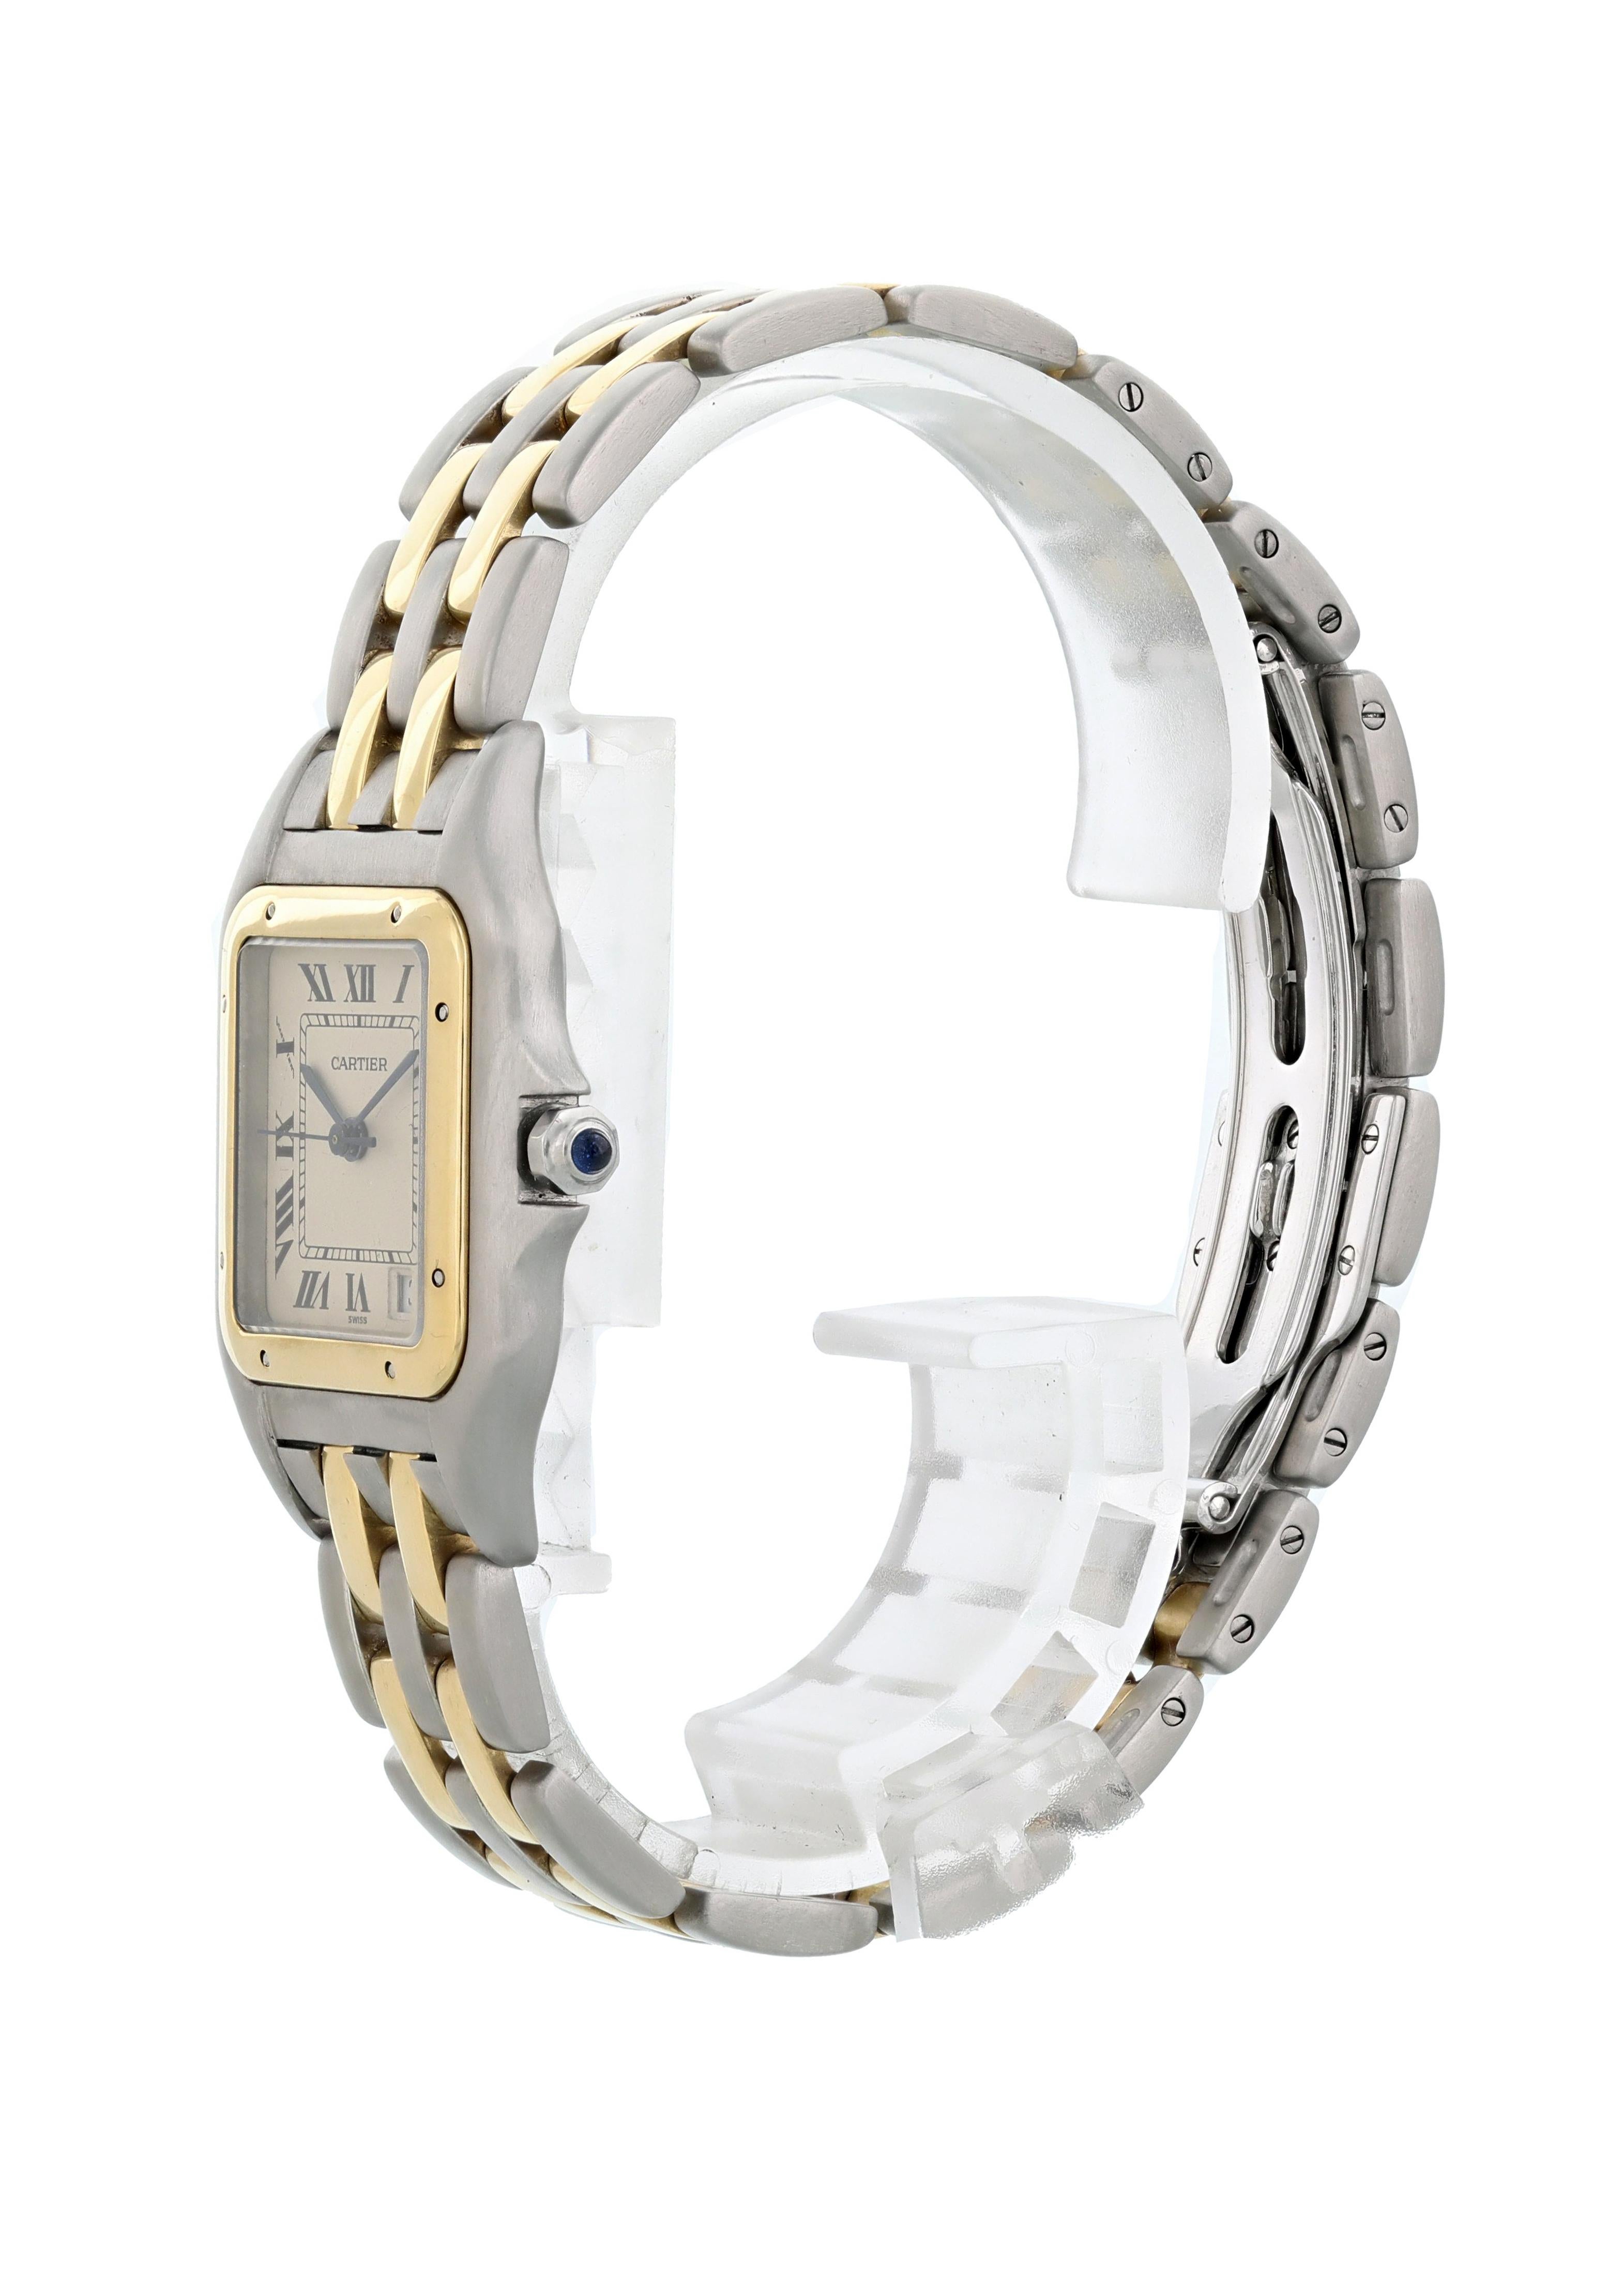 Cartier Panthere 1100 Midsize Ladies Watch. 27mm stainless steel case with an 18k yellow gold bezel. Off white dial with blue steel hands and black roman numeral hour markers. Date display at the 5 o'clock position. Stainless steel and an 18k yellow